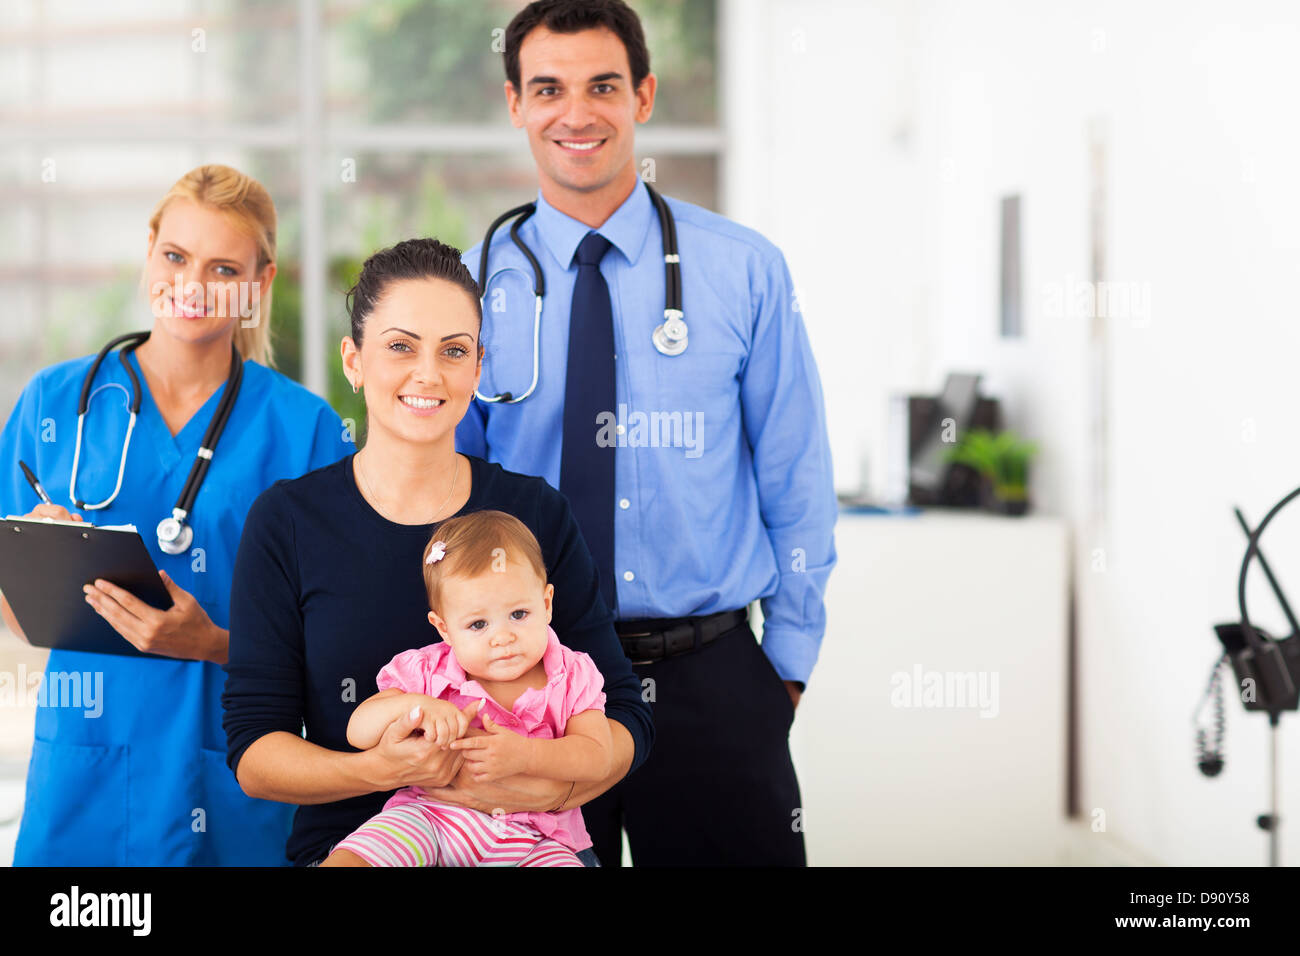 smiling pediatric medical professionals with mother and baby girl Stock Photo